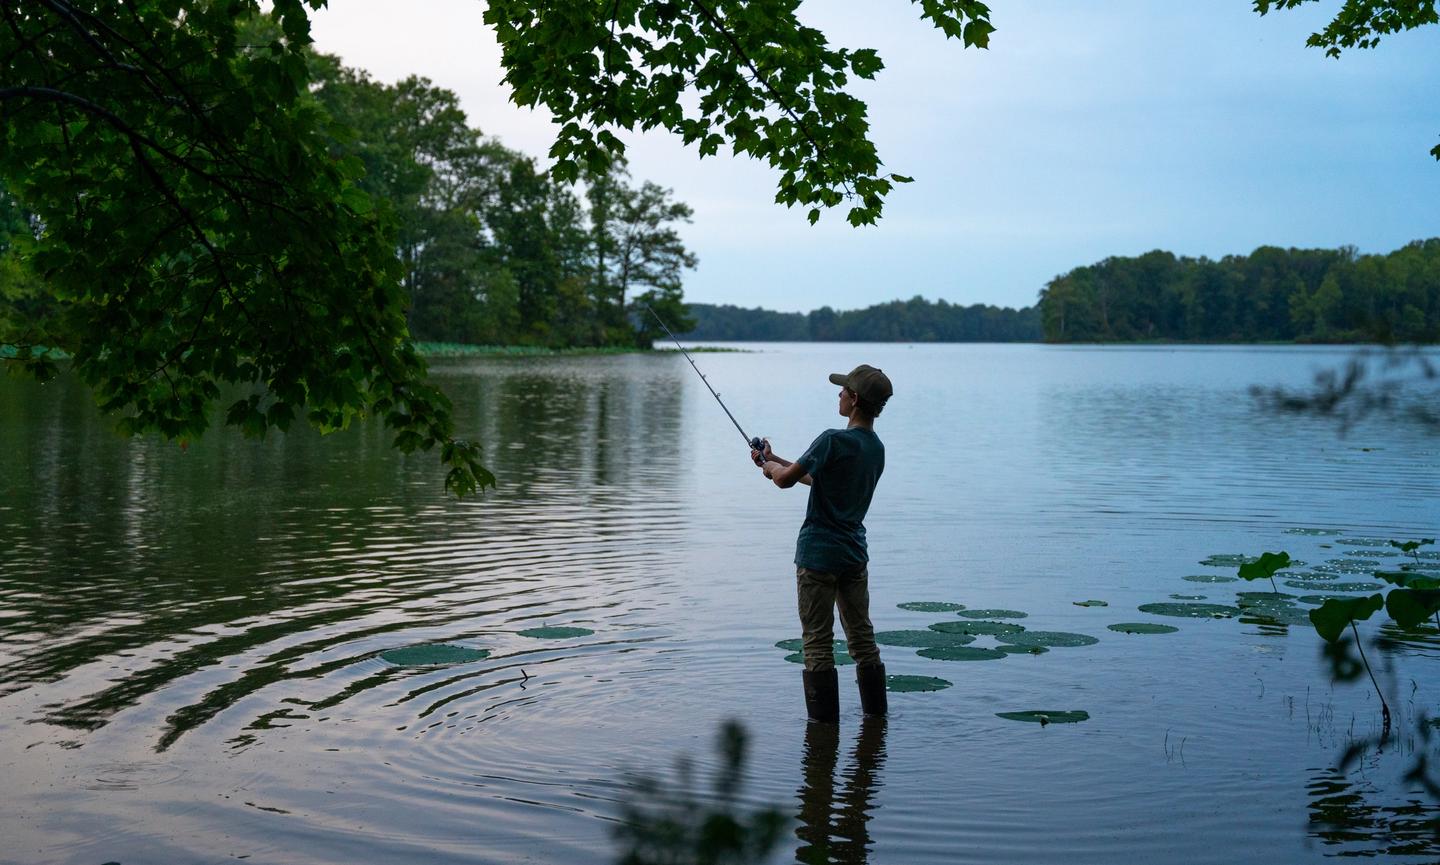 For outdoor recreation, Daviess County offers plenty of boating and fishing.